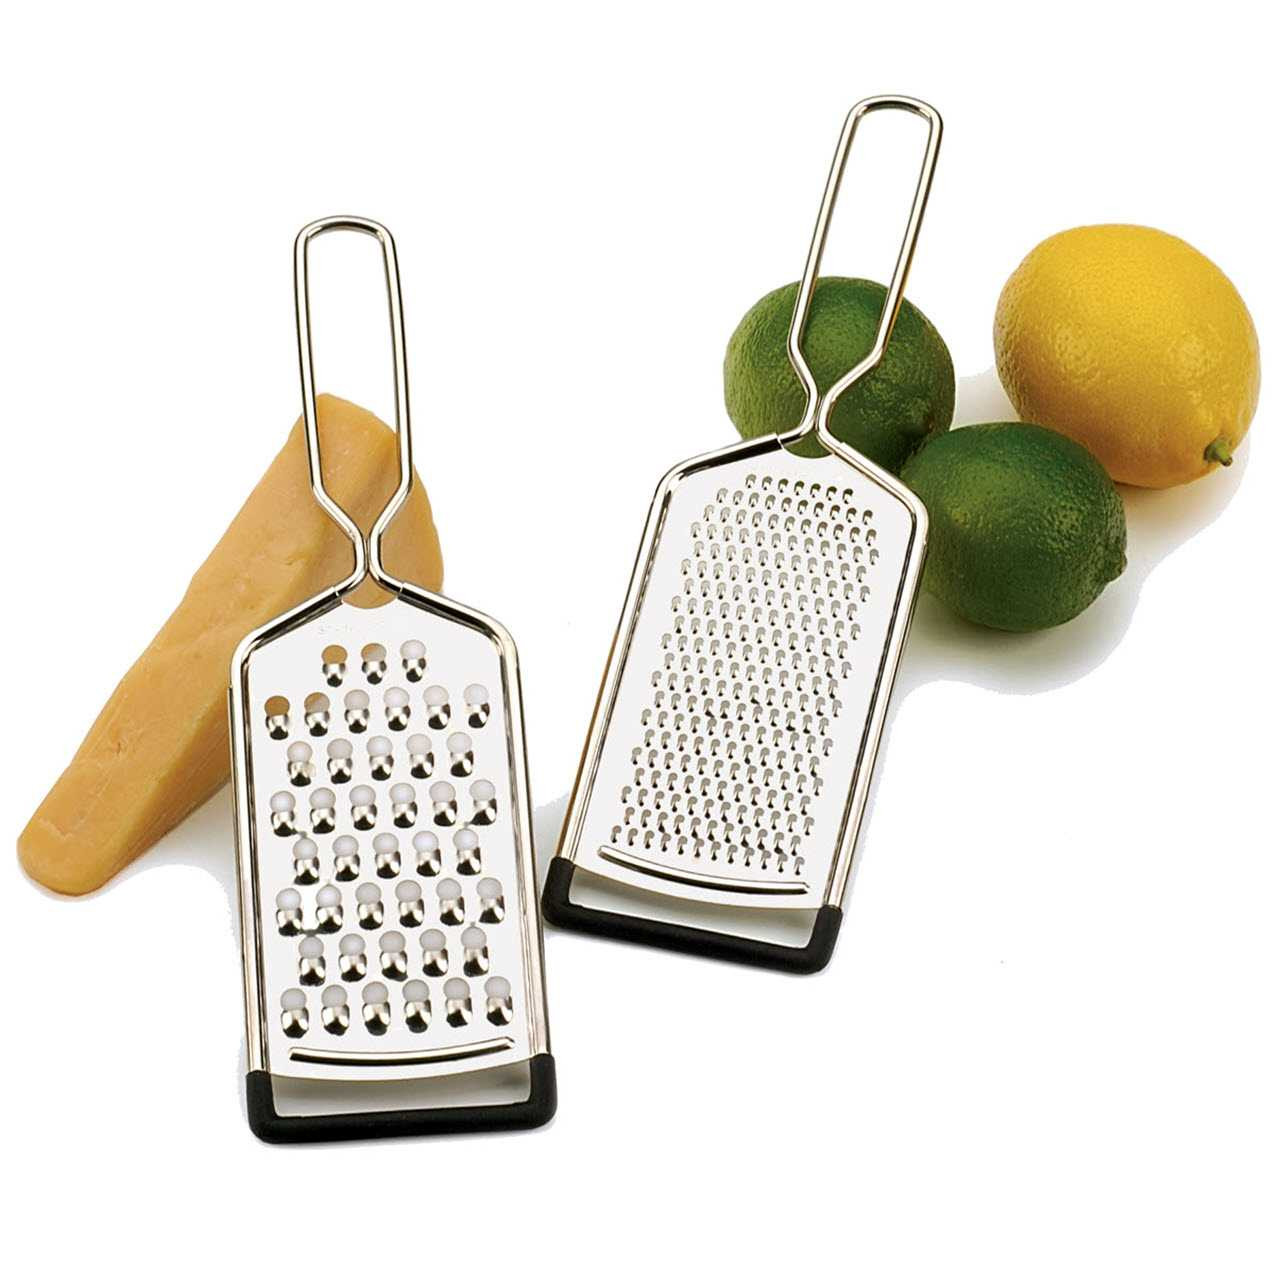 https://cdn11.bigcommerce.com/s-21kj3ntgv1/images/stencil/1280x1280/products/201/2719/RSVP-Endurance-Stainless-Steel-Cheese-Graters-with-Food__55723.1661292072.jpg?c=2